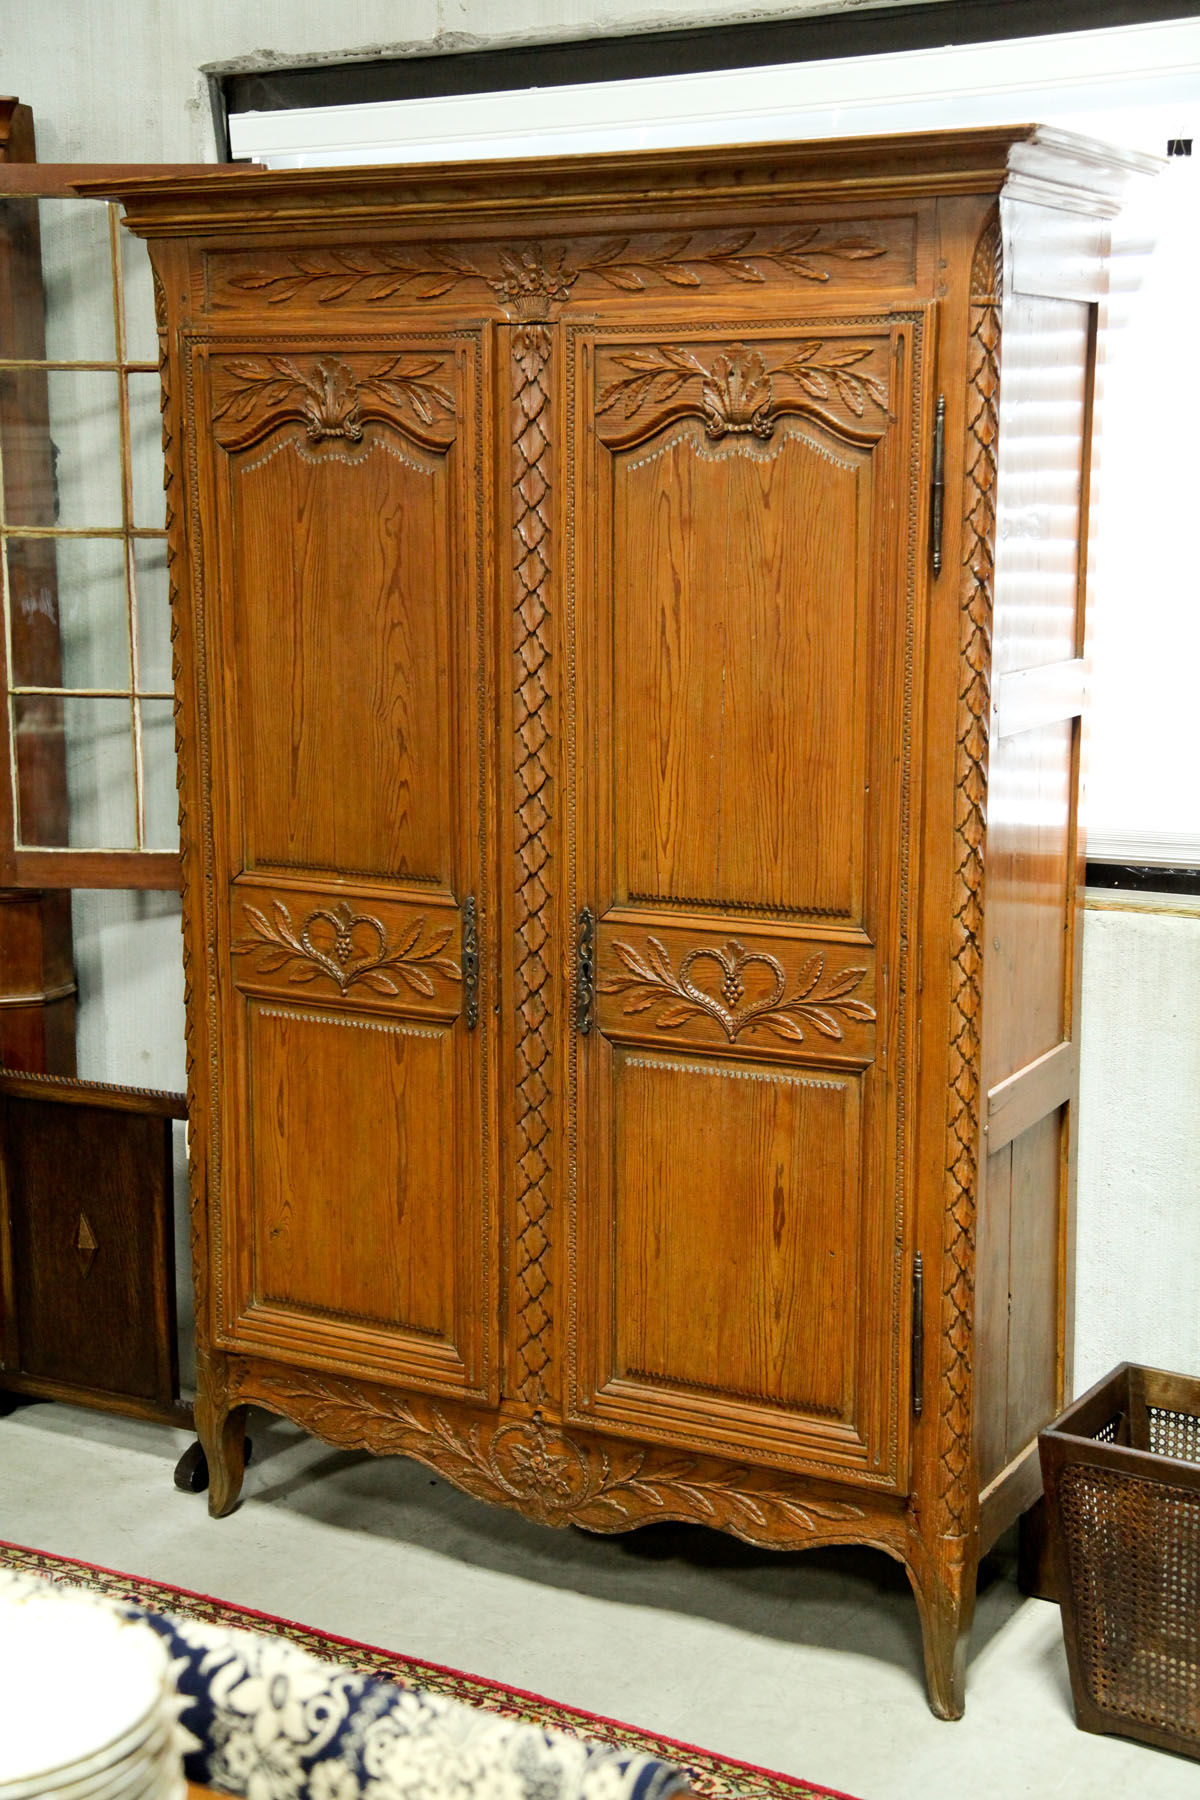 ARMOIRE France early to mid 10c285